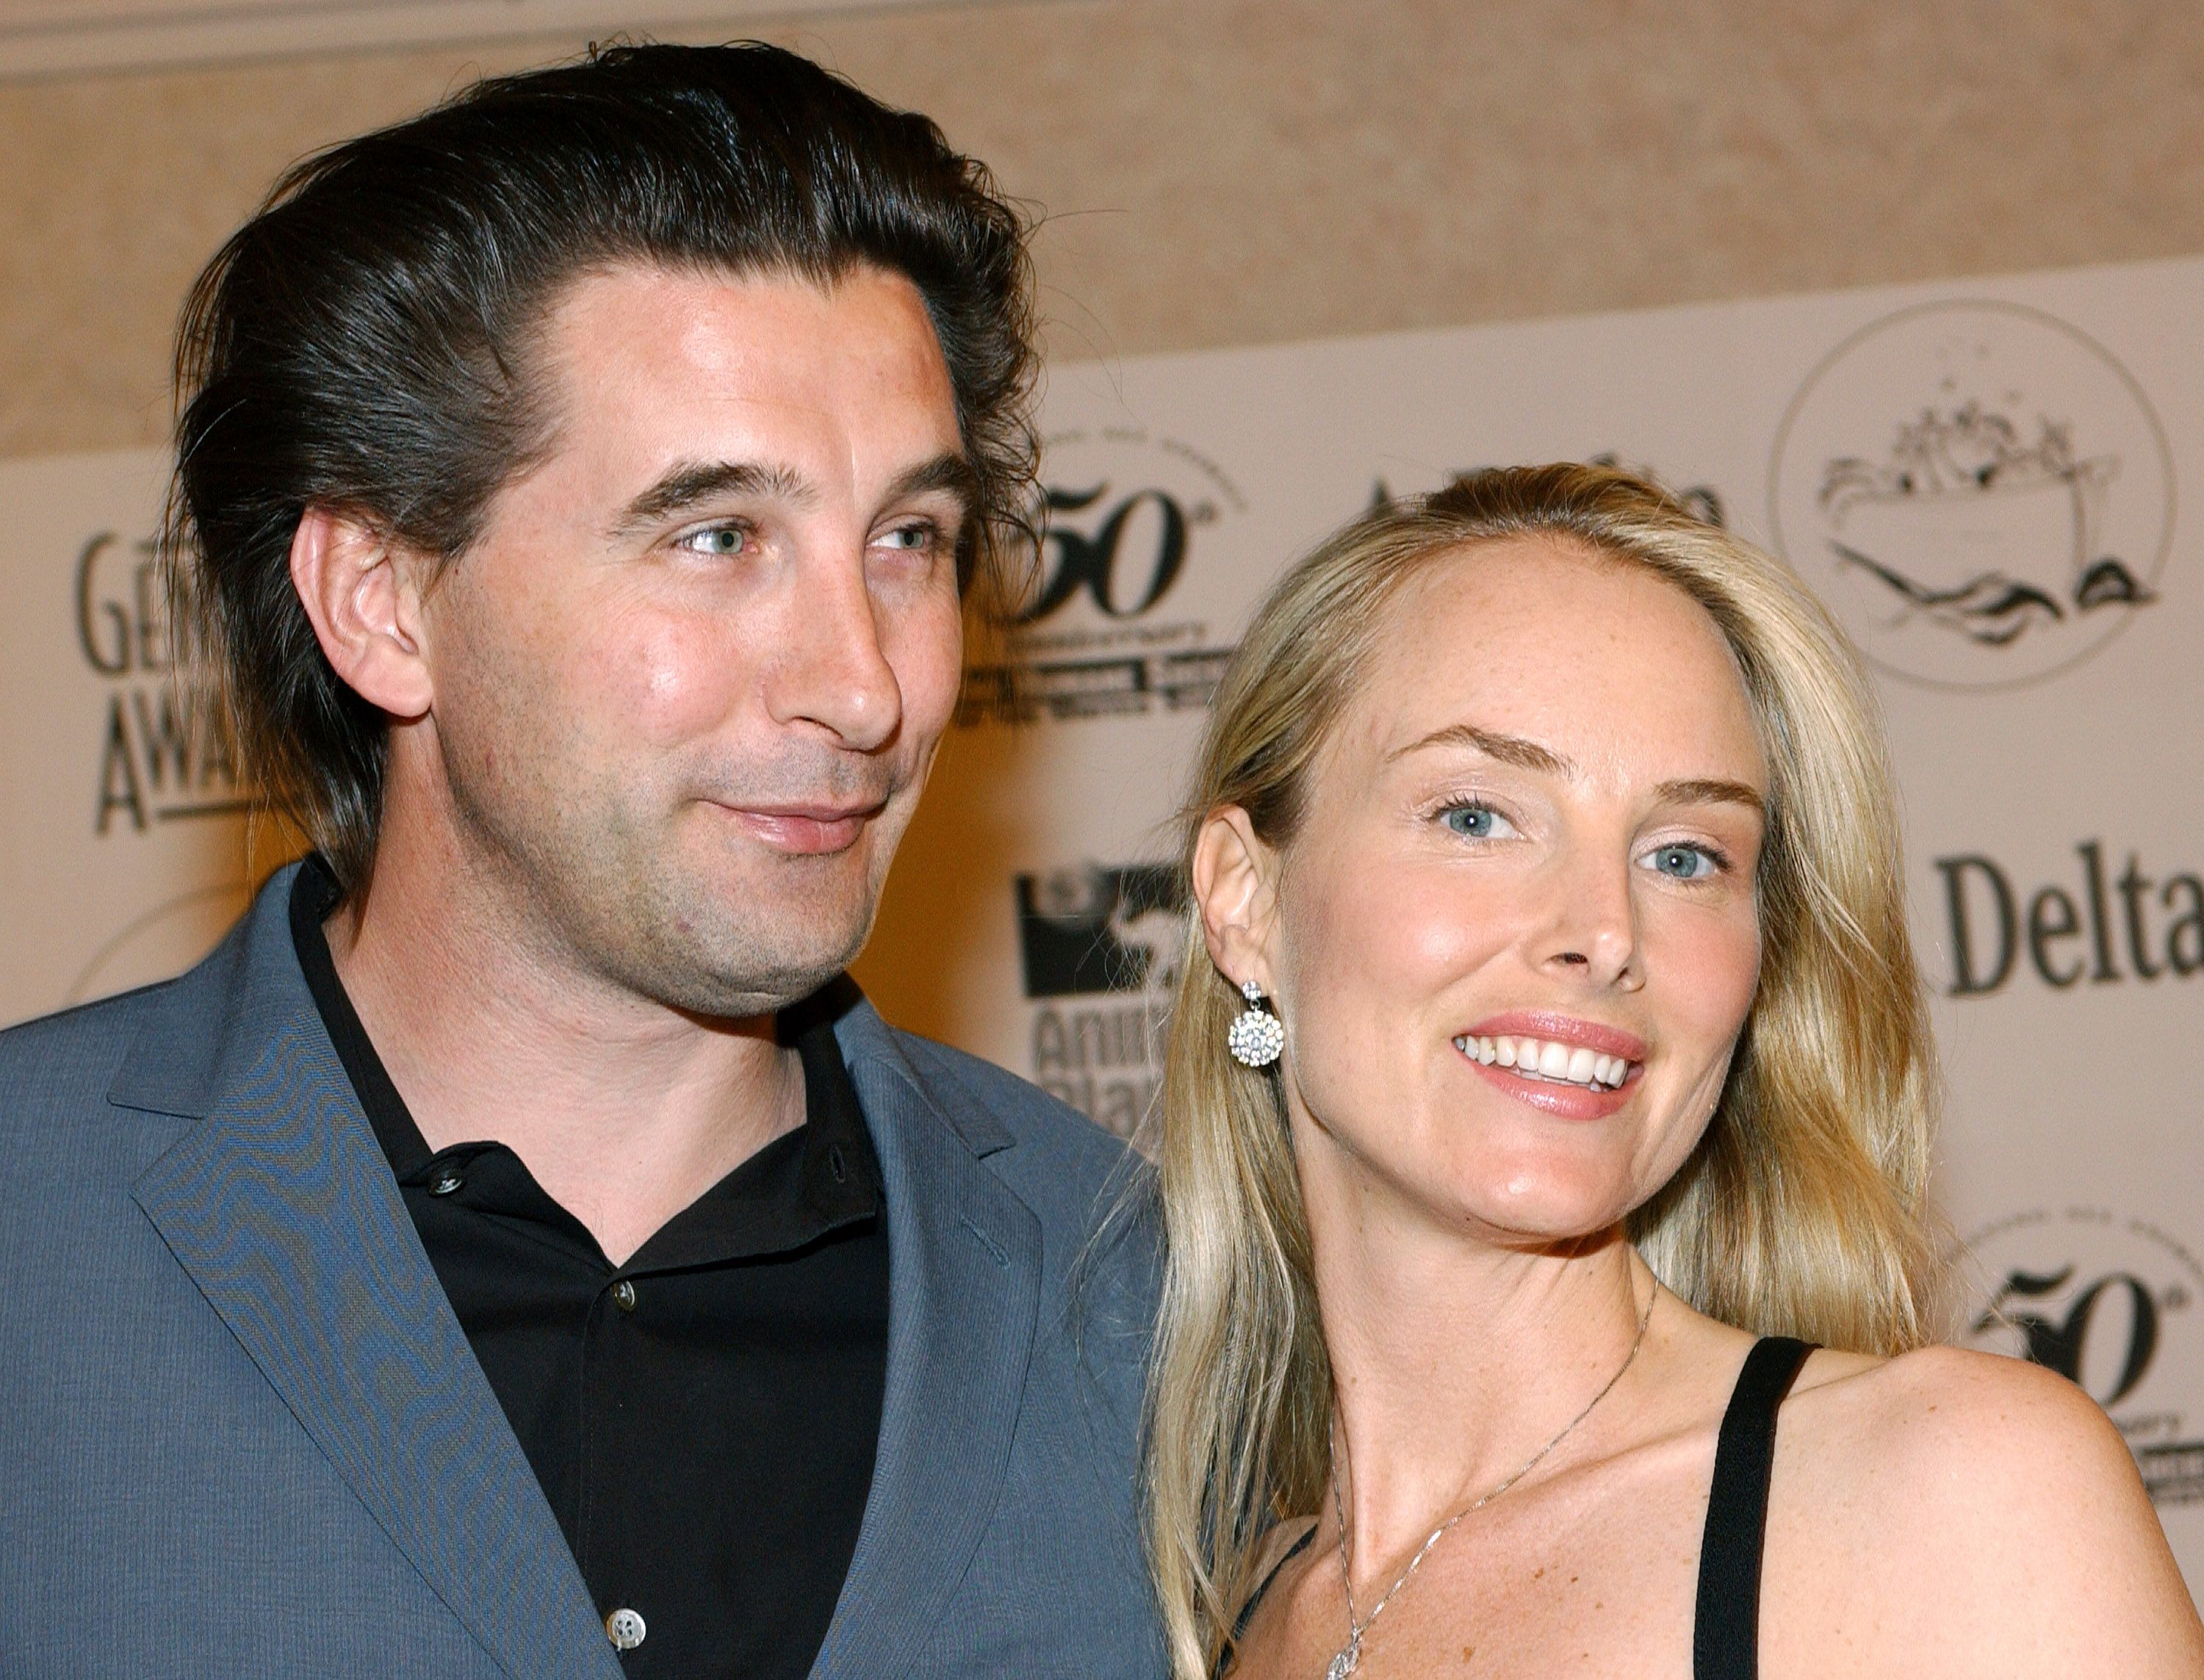 Actor William Baldwin And Wife Singer Chynna Phillips News Photo 3118123 1551466584 